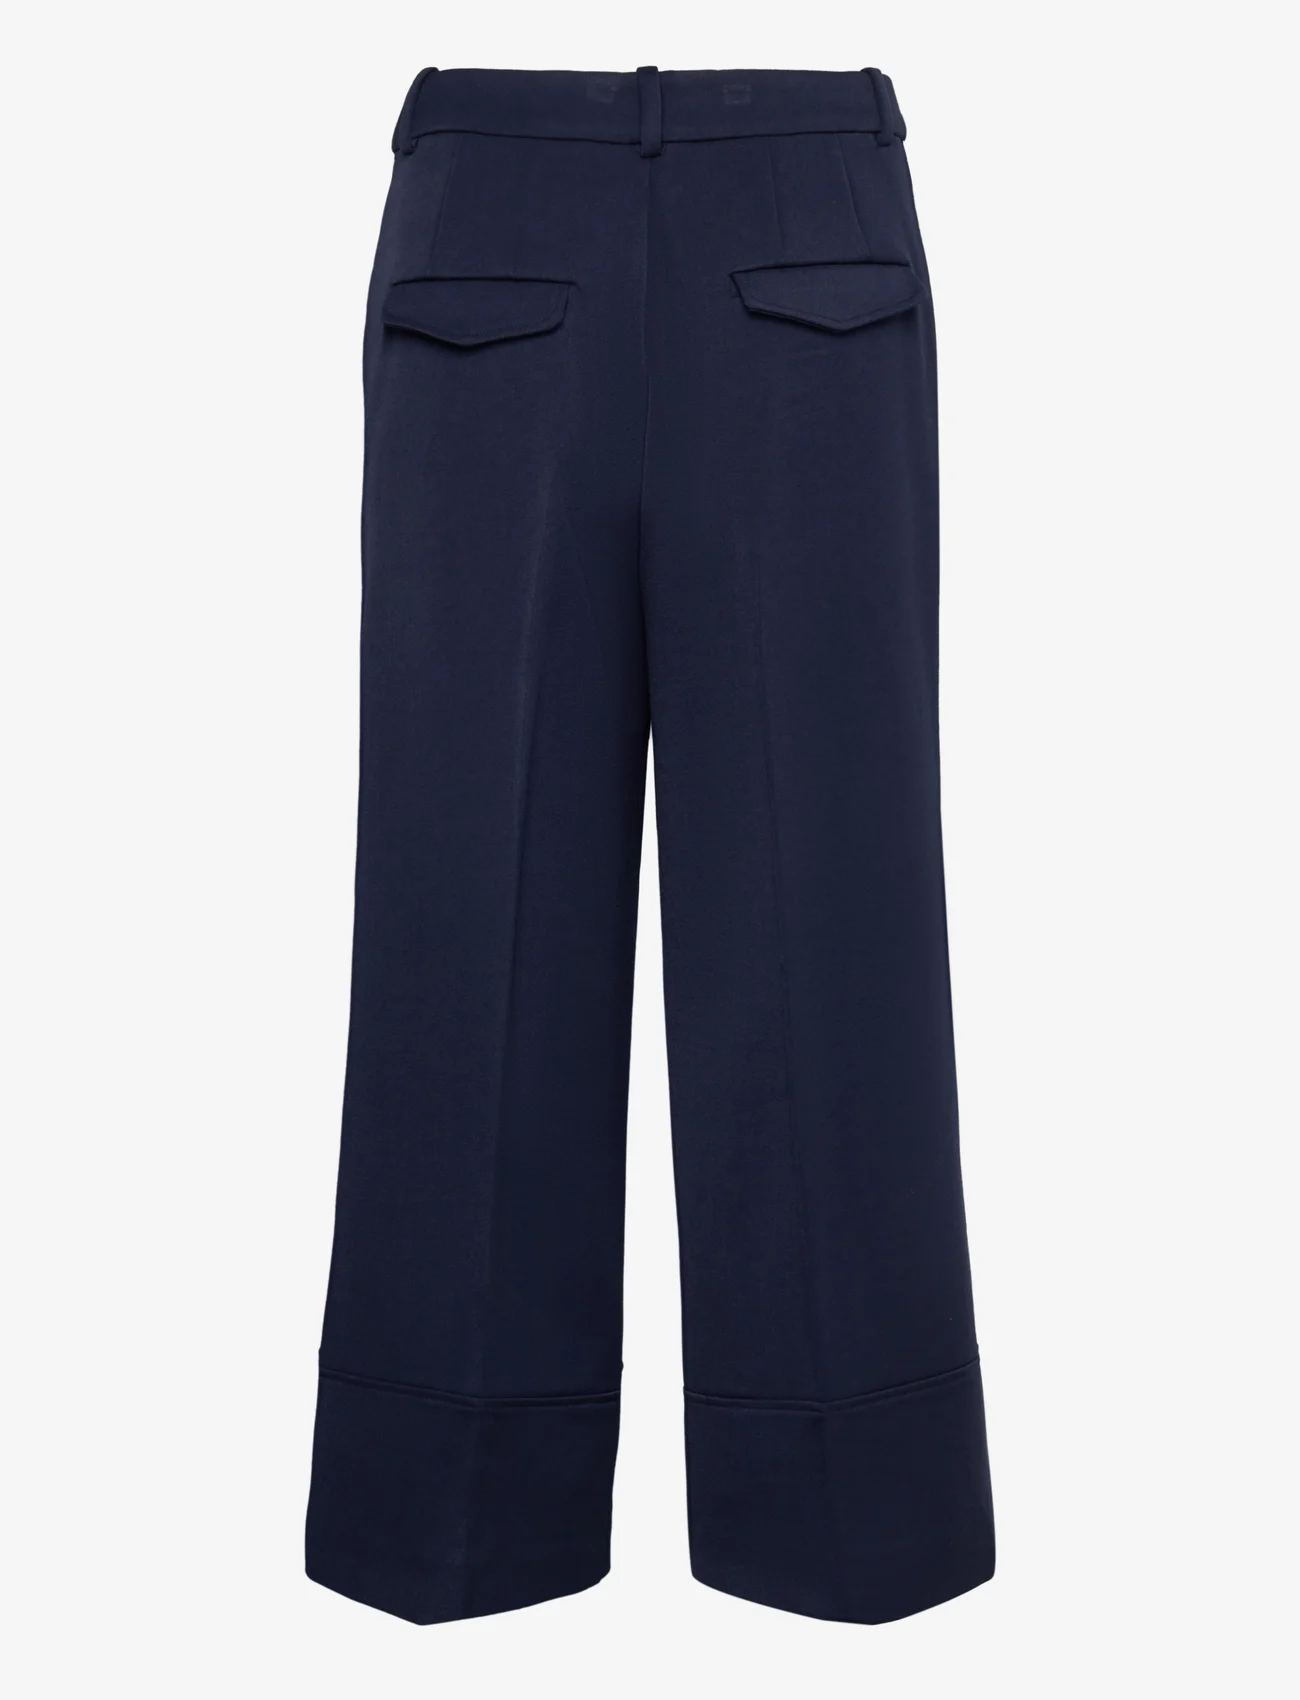 Esprit Casual - Culotte trousers with blended viscose - straight leg hosen - navy - 1